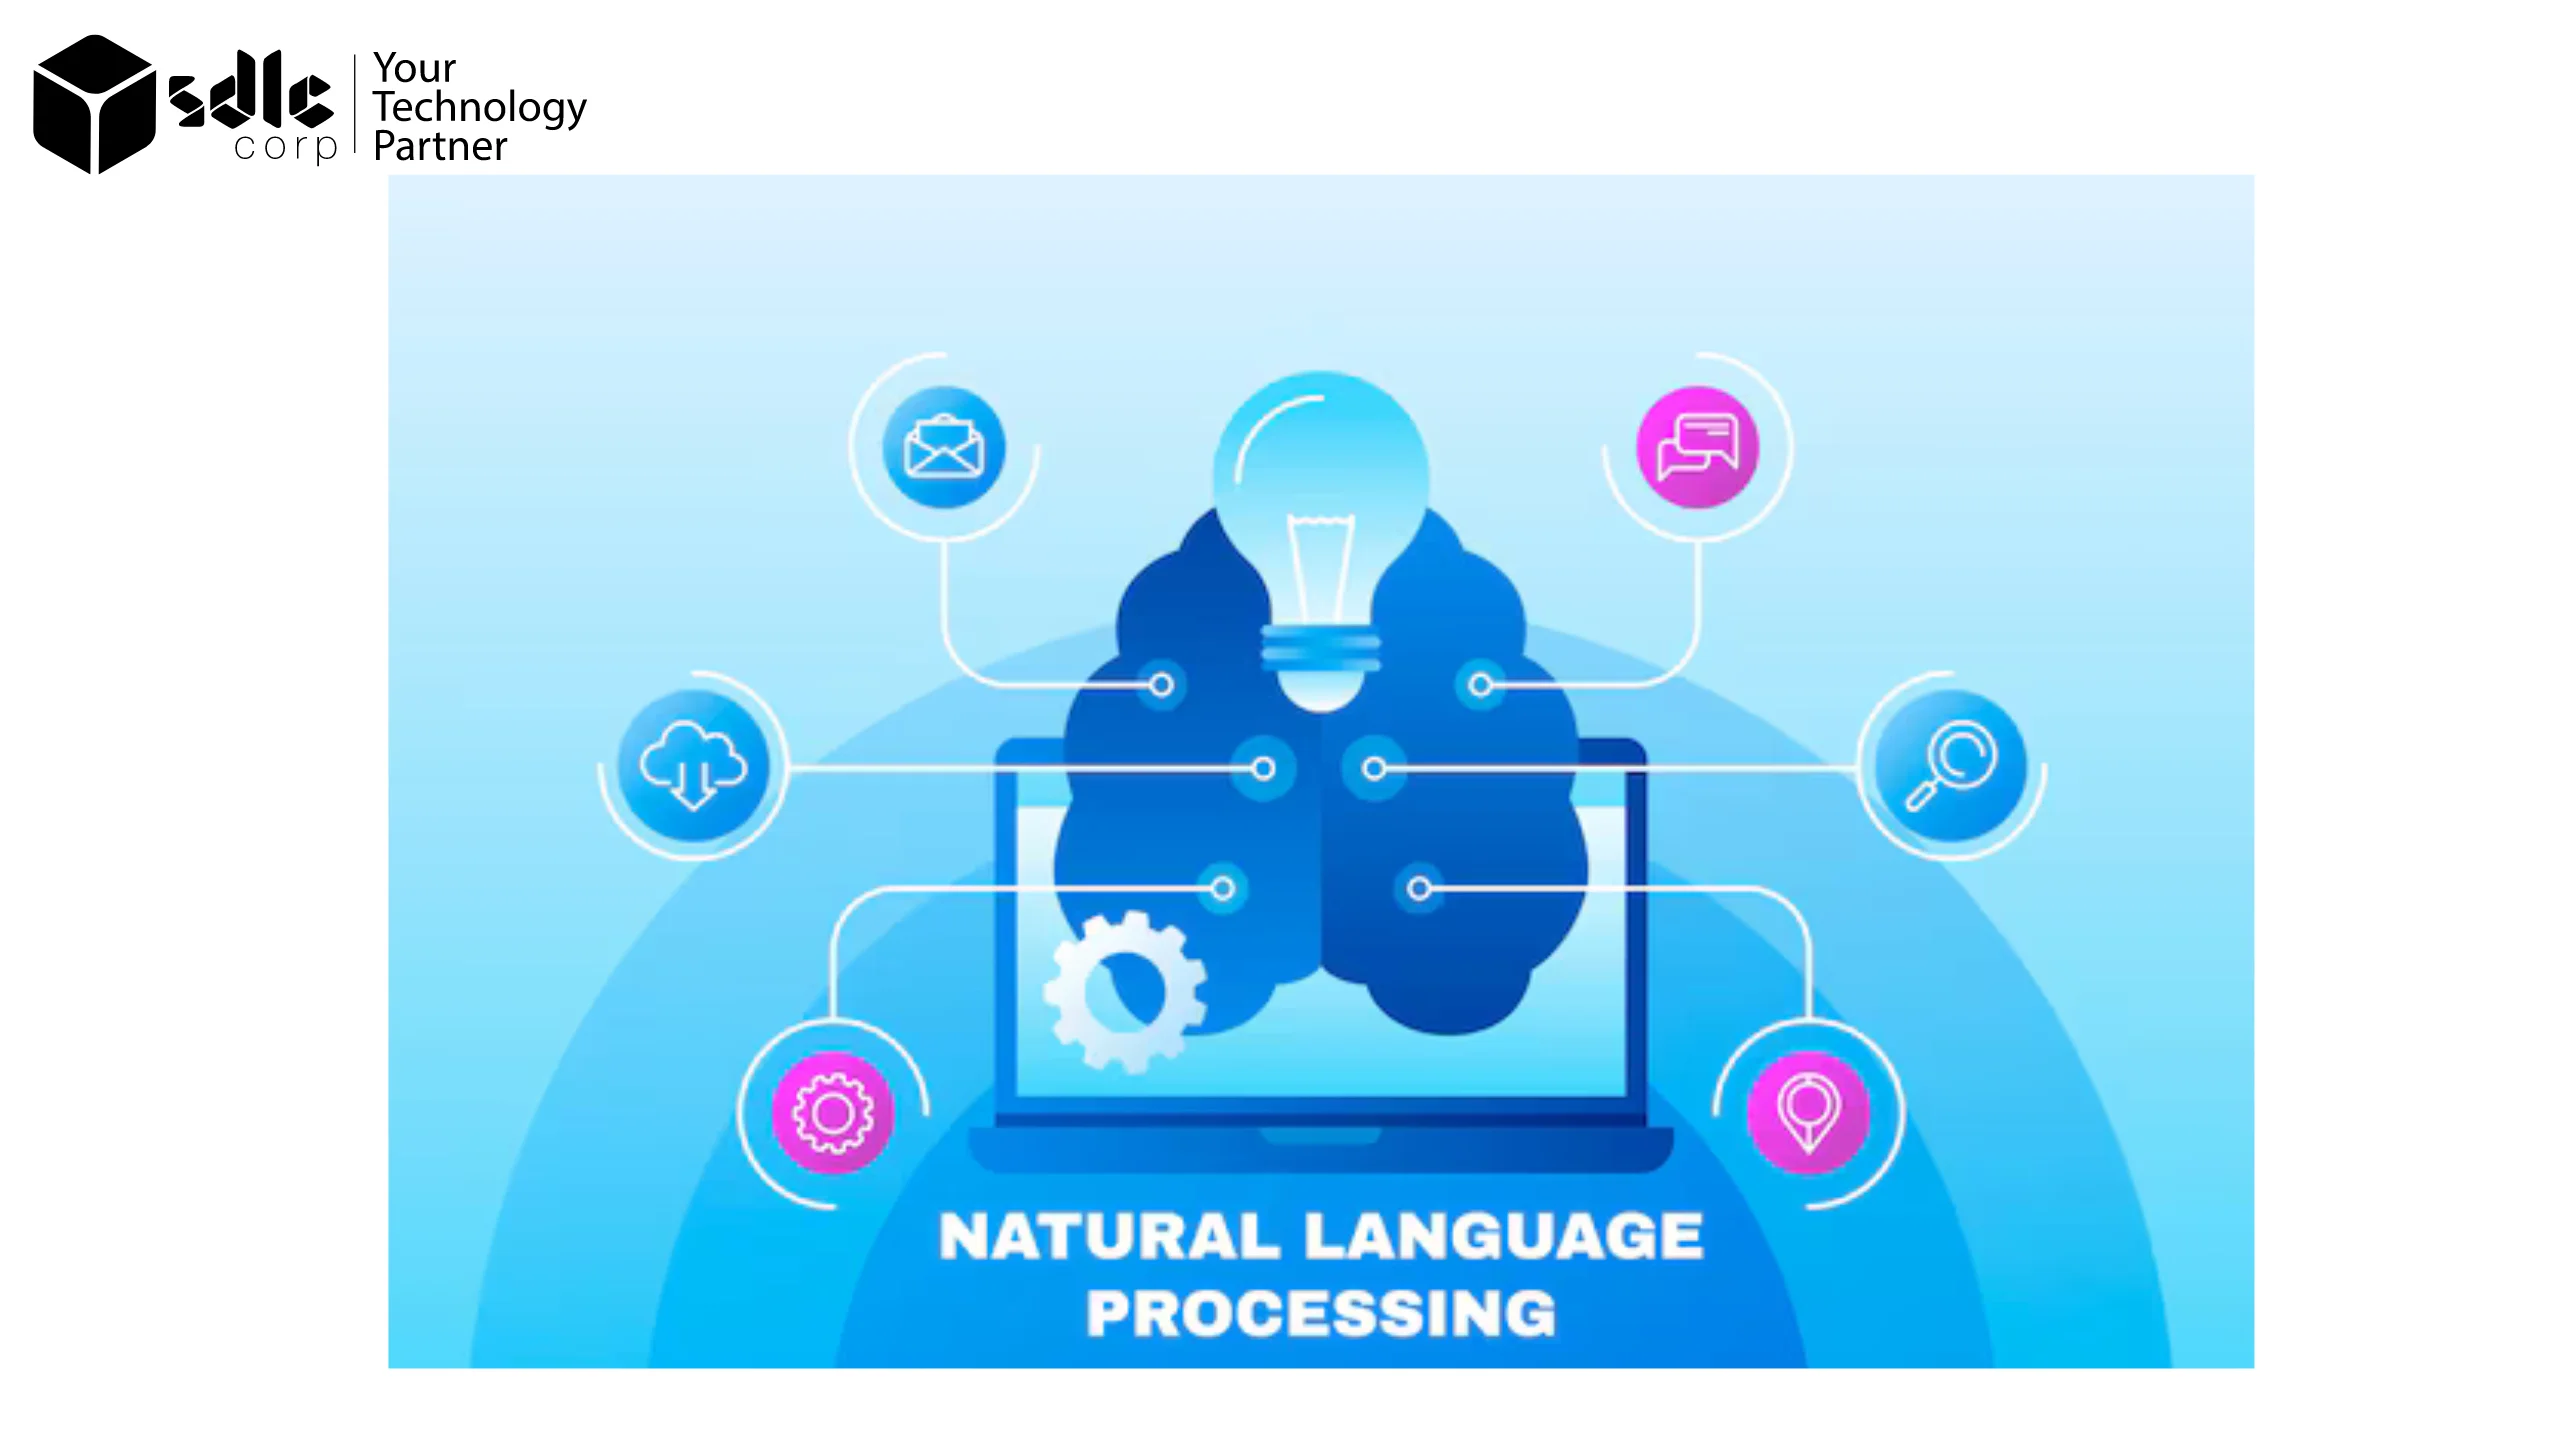 NLP (Natural Language Processing) in invoice processing involves